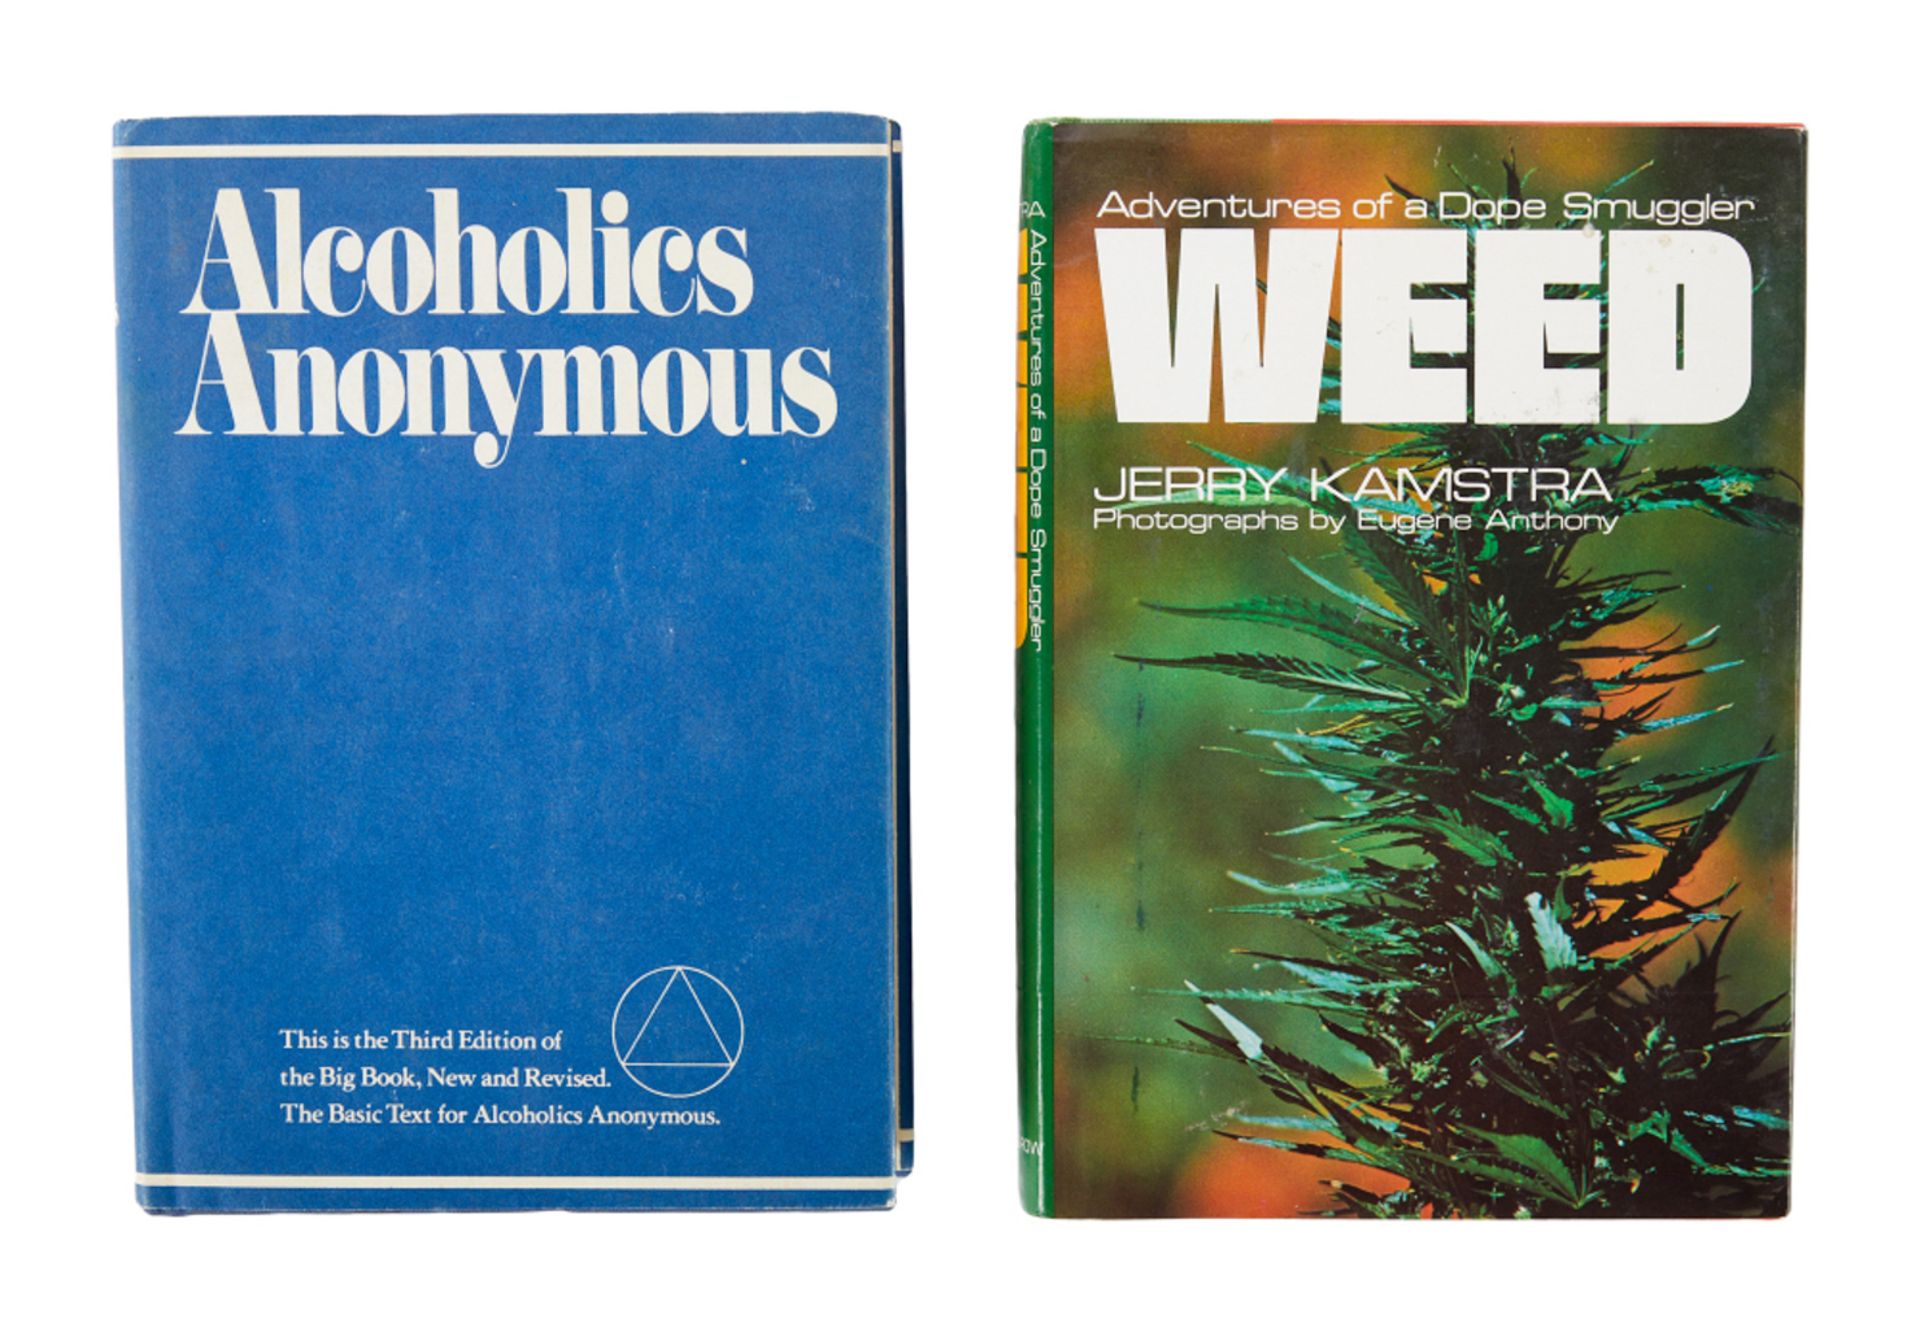 DENNIS HOPPER | PERSONALLY-OWNED ALCOHOLICS ANONYMOUS AND "WEED" BOOKS